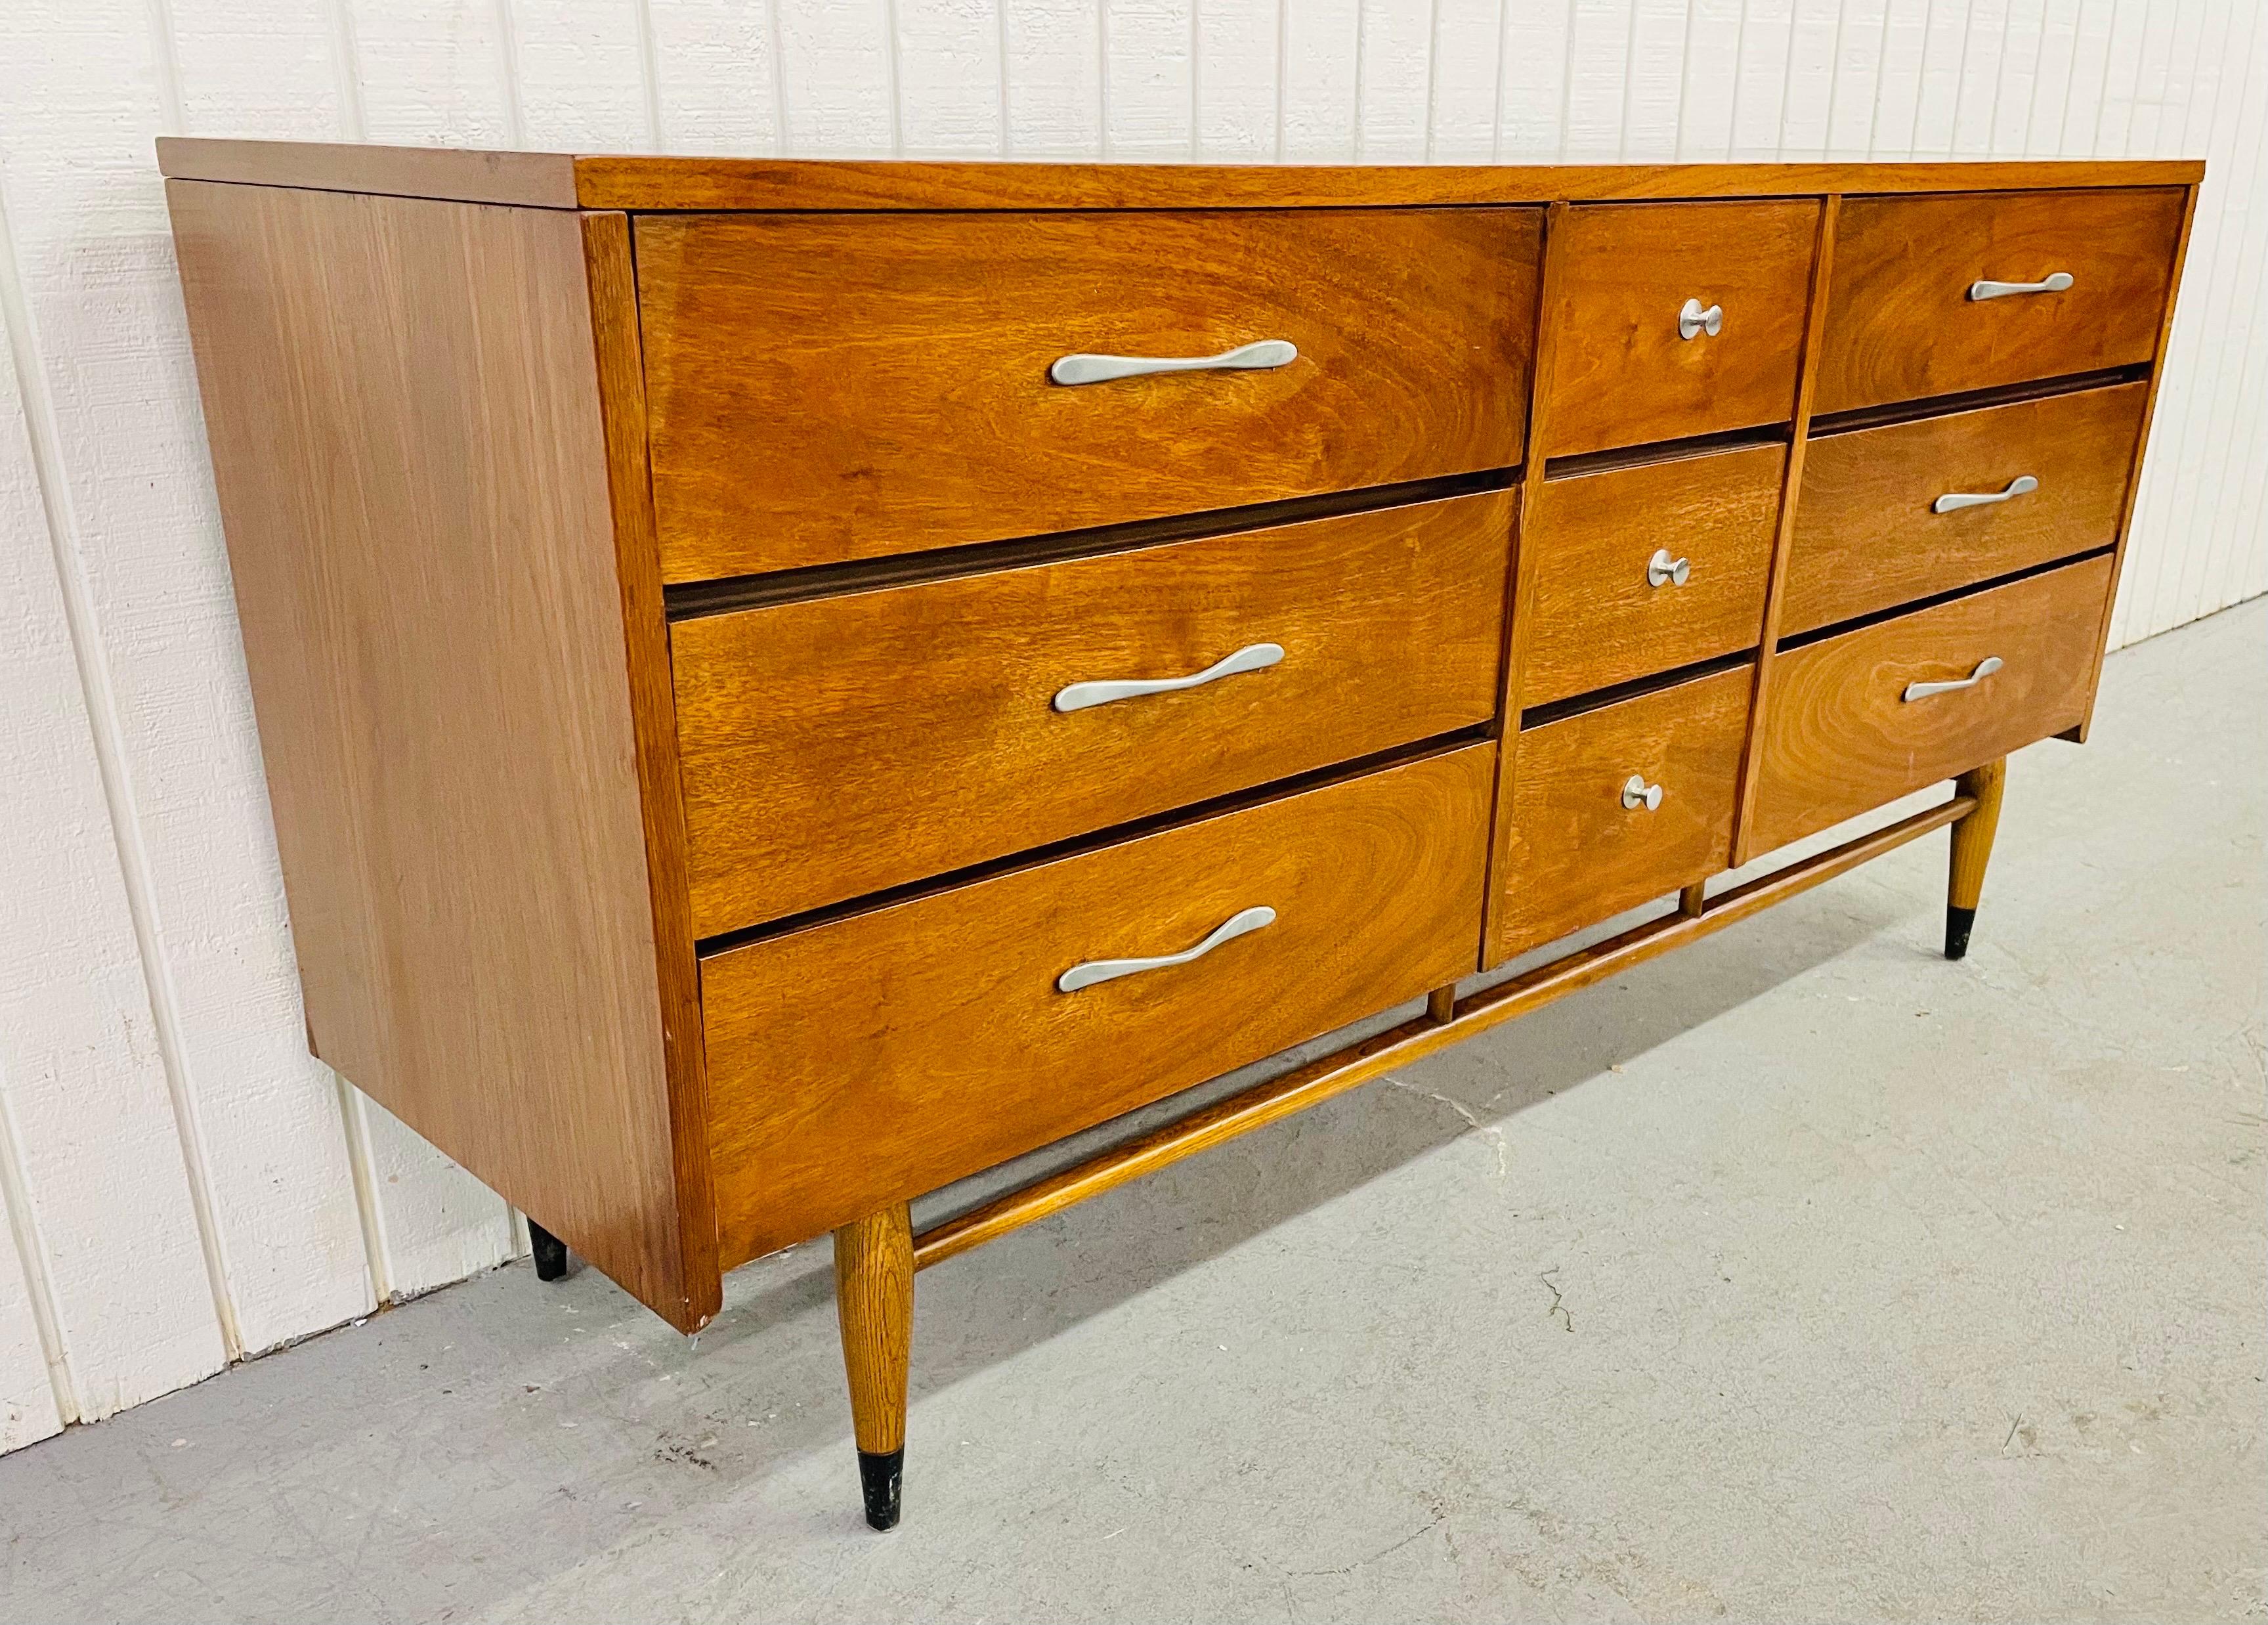 This listing is for a Mid-Century Lane Acclaim Walnut triple dresser. Featuring nine drawers for storage, original chrome pulls, a dovetailed top, stretcher between the legs, black caps on the feet, and a beautiful walnut finish.